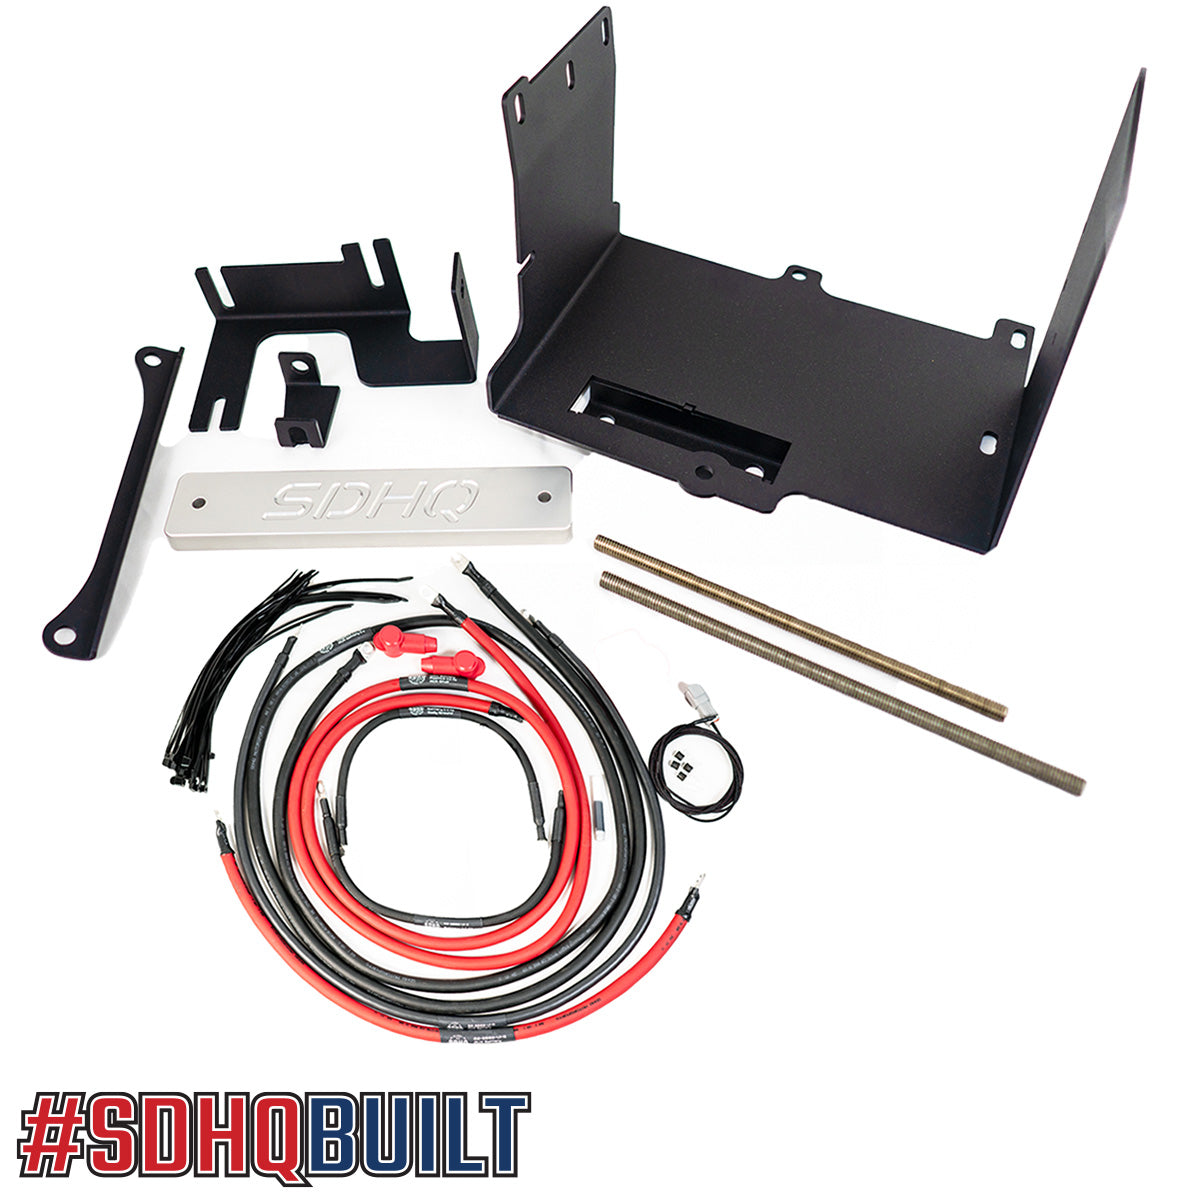 '16-23 Toyota Tacoma SDHQ Built "Build your Own" Dual Battery Kit